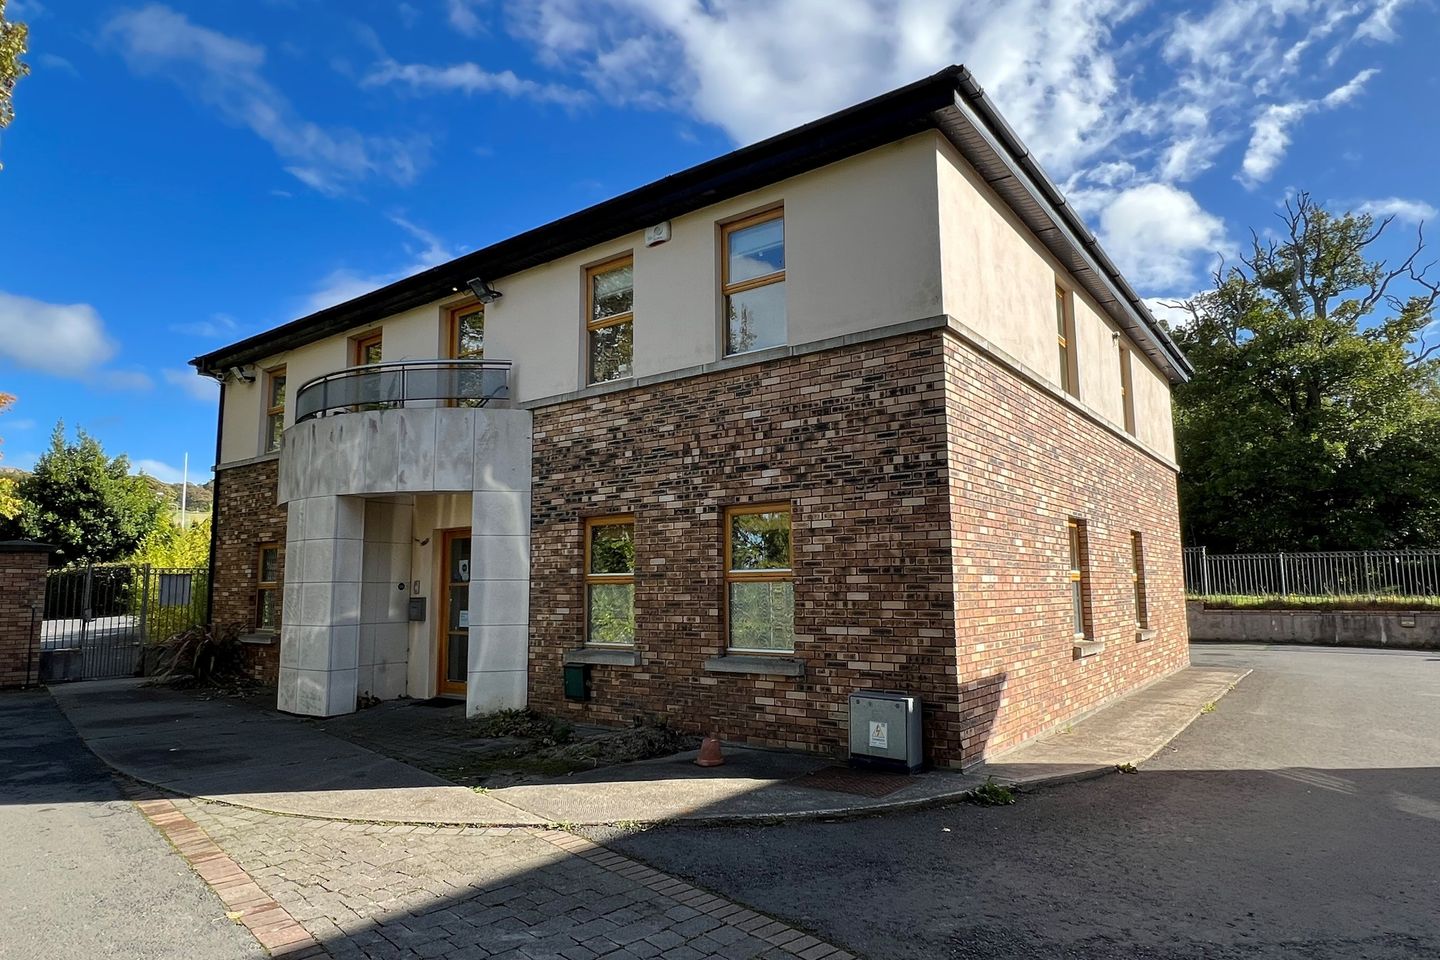 3A Woodlands Office Park, Southern Cross Road, Bray, Co. Wicklow, A98C9R3